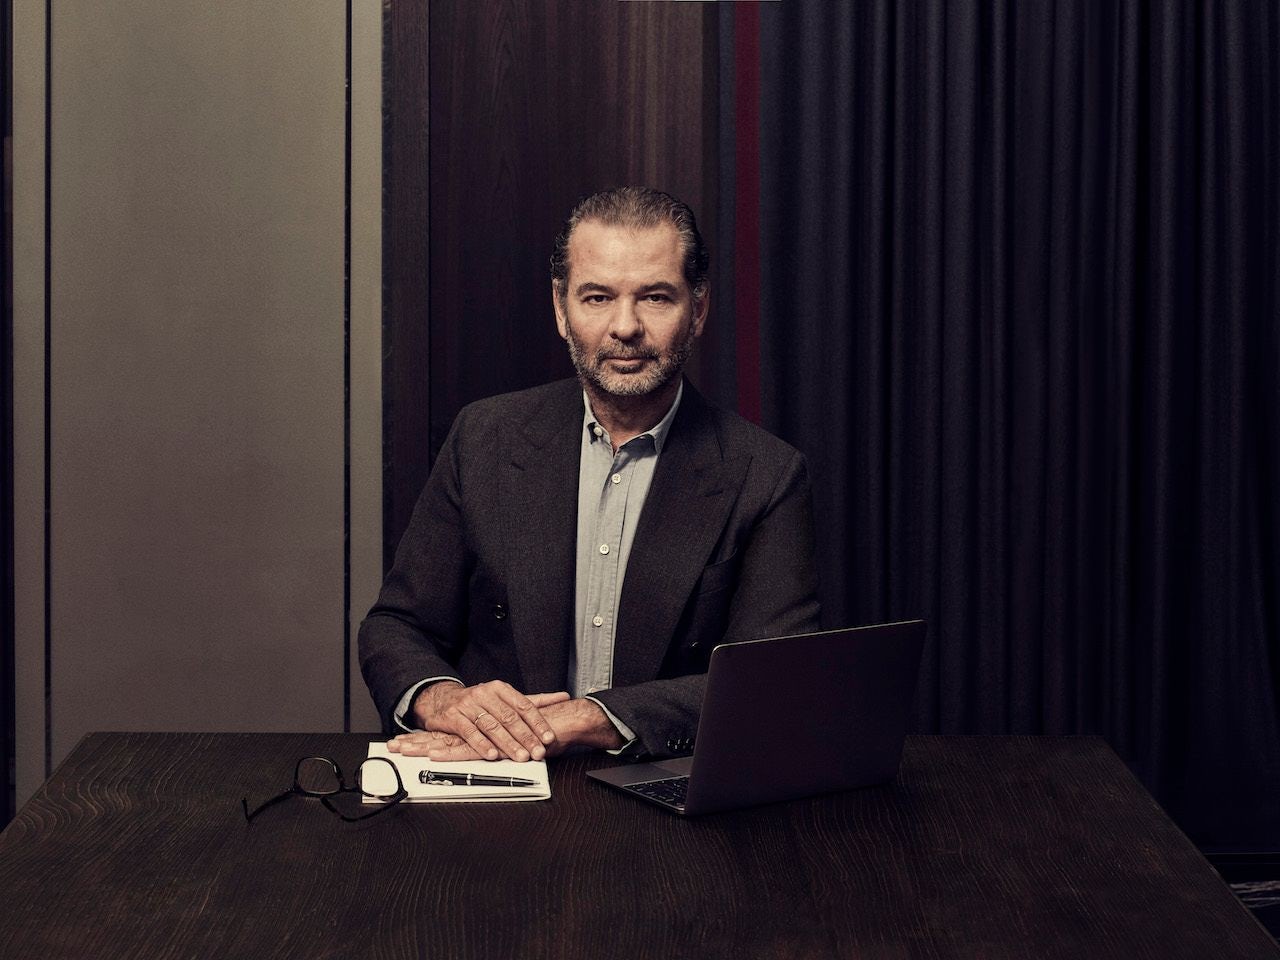 Moncler CEO Remo Ruffini on Developing A WeChat-Driven Strategy in China